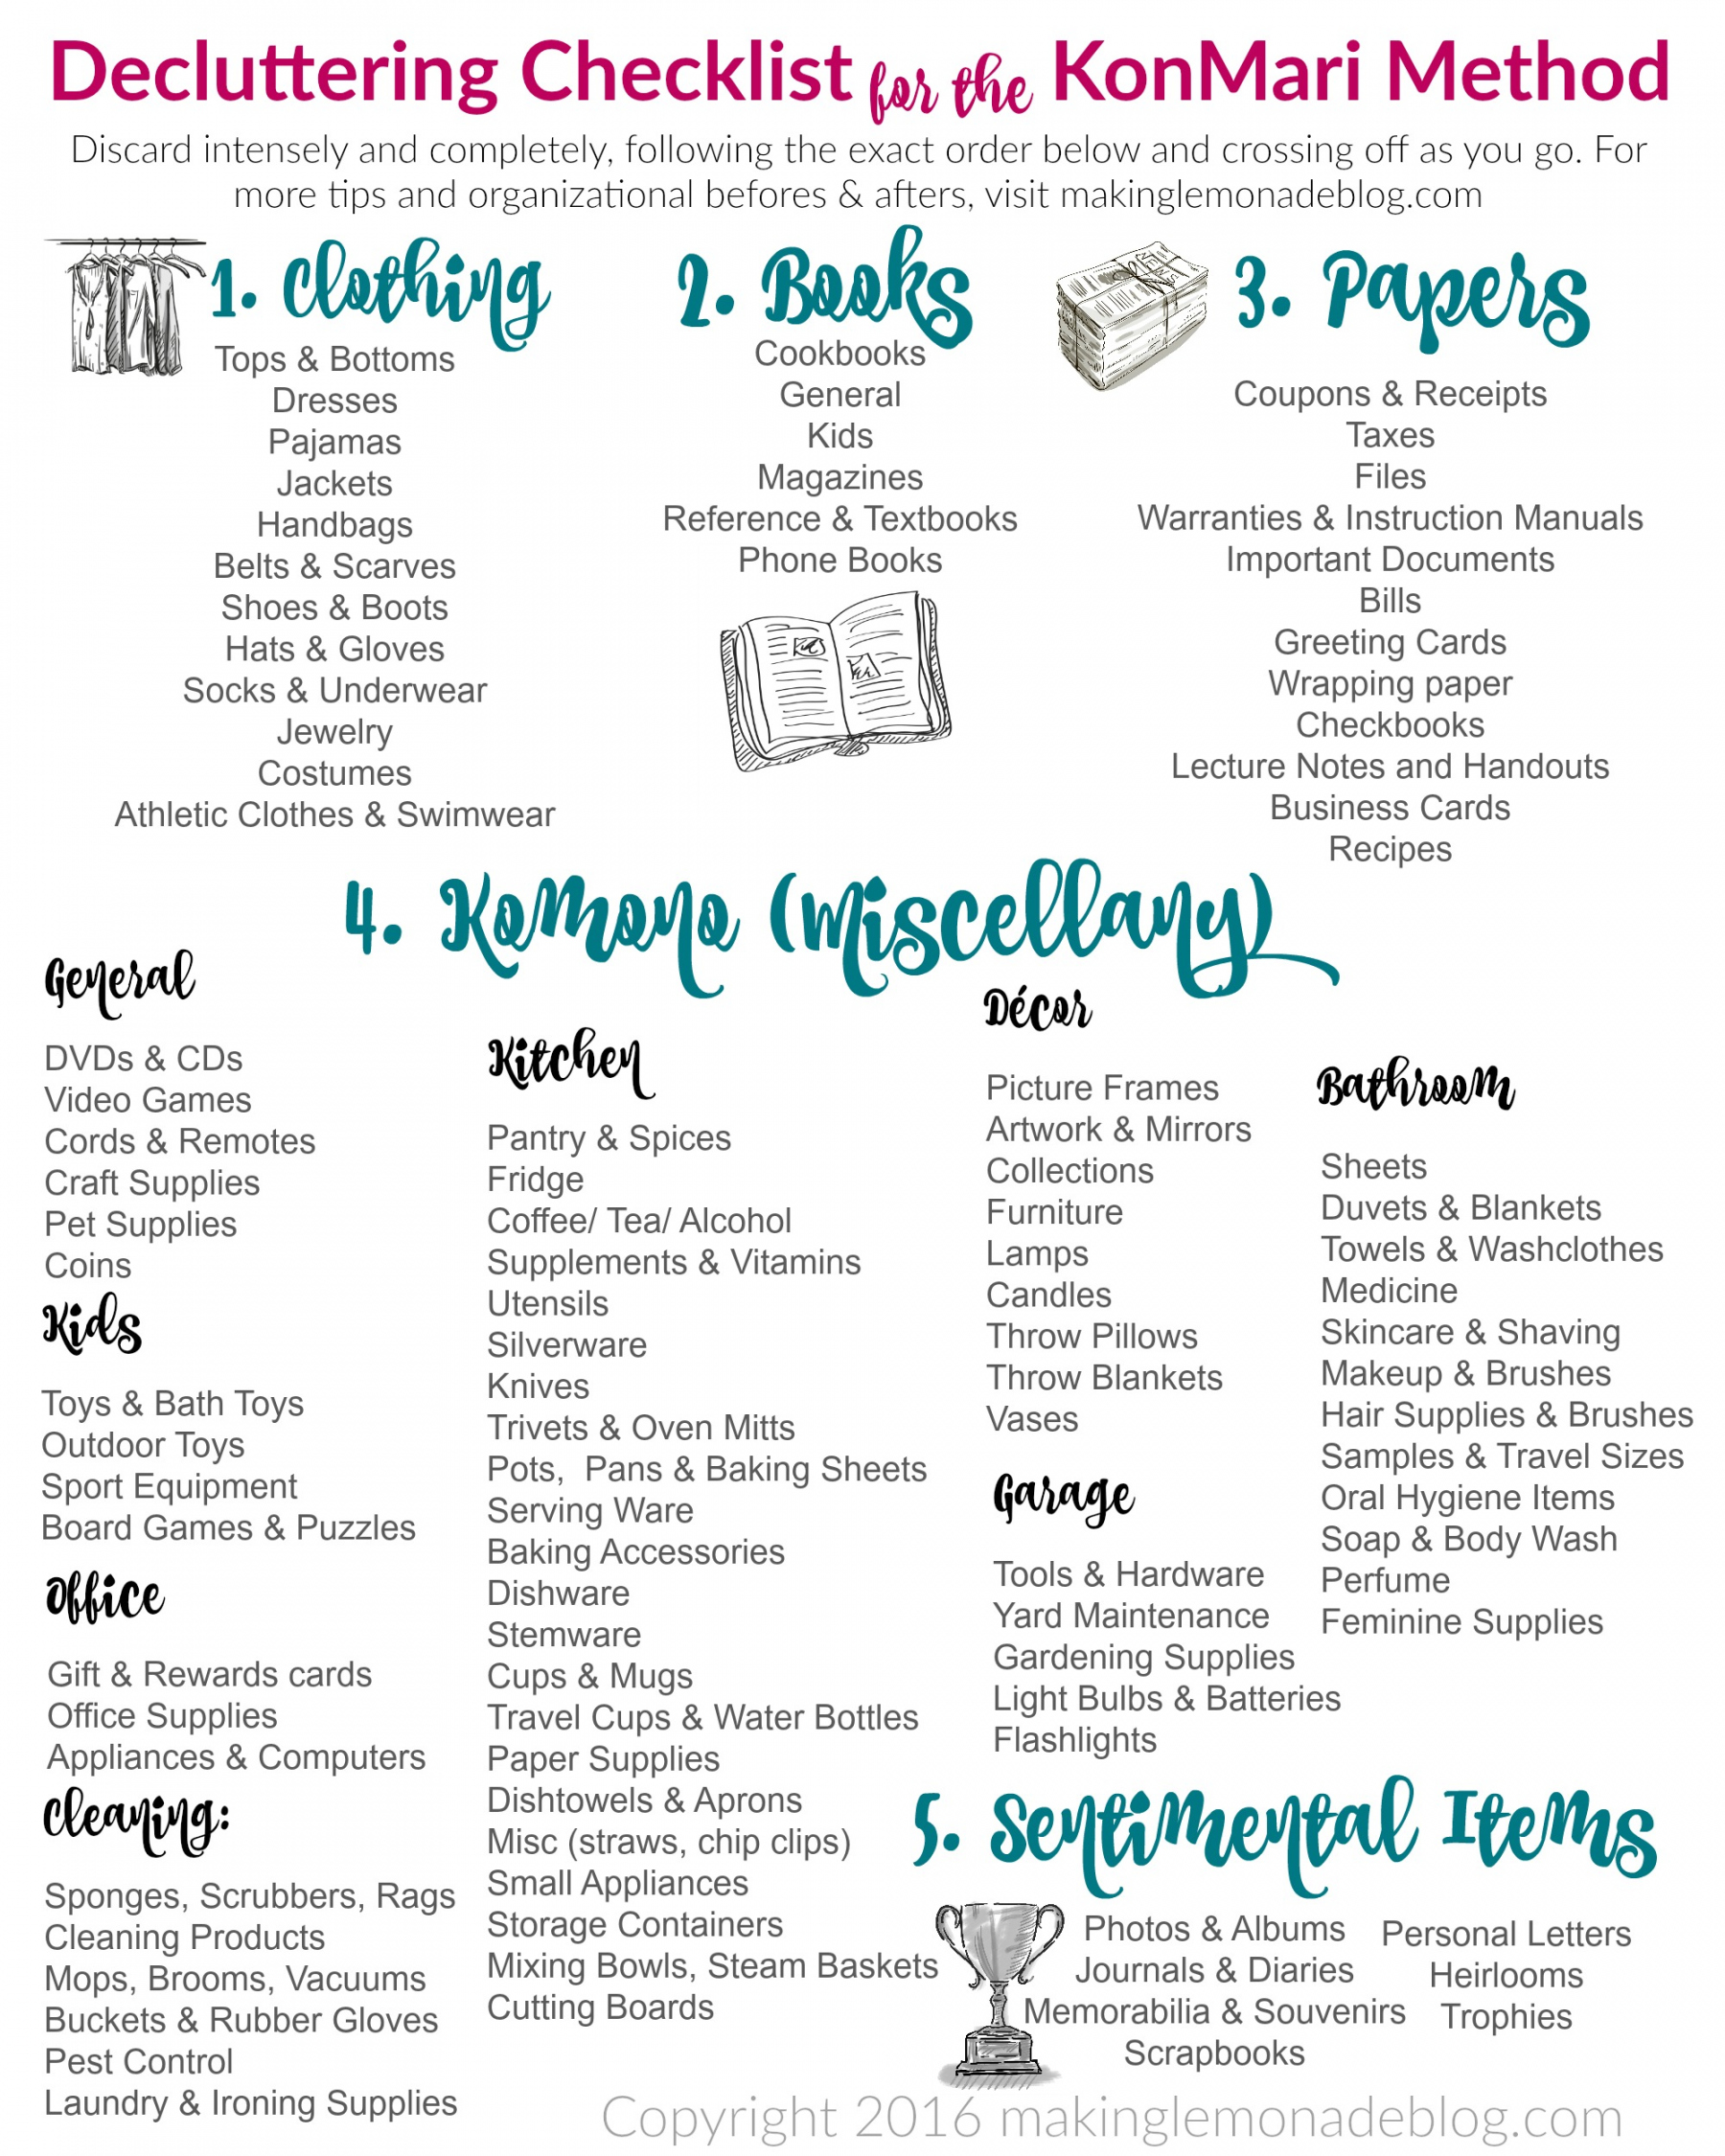 The Ultimate FREE Printable Decluttering Checklist for KonMari  - FREE Printables - Free Printable Decluttering Checklist